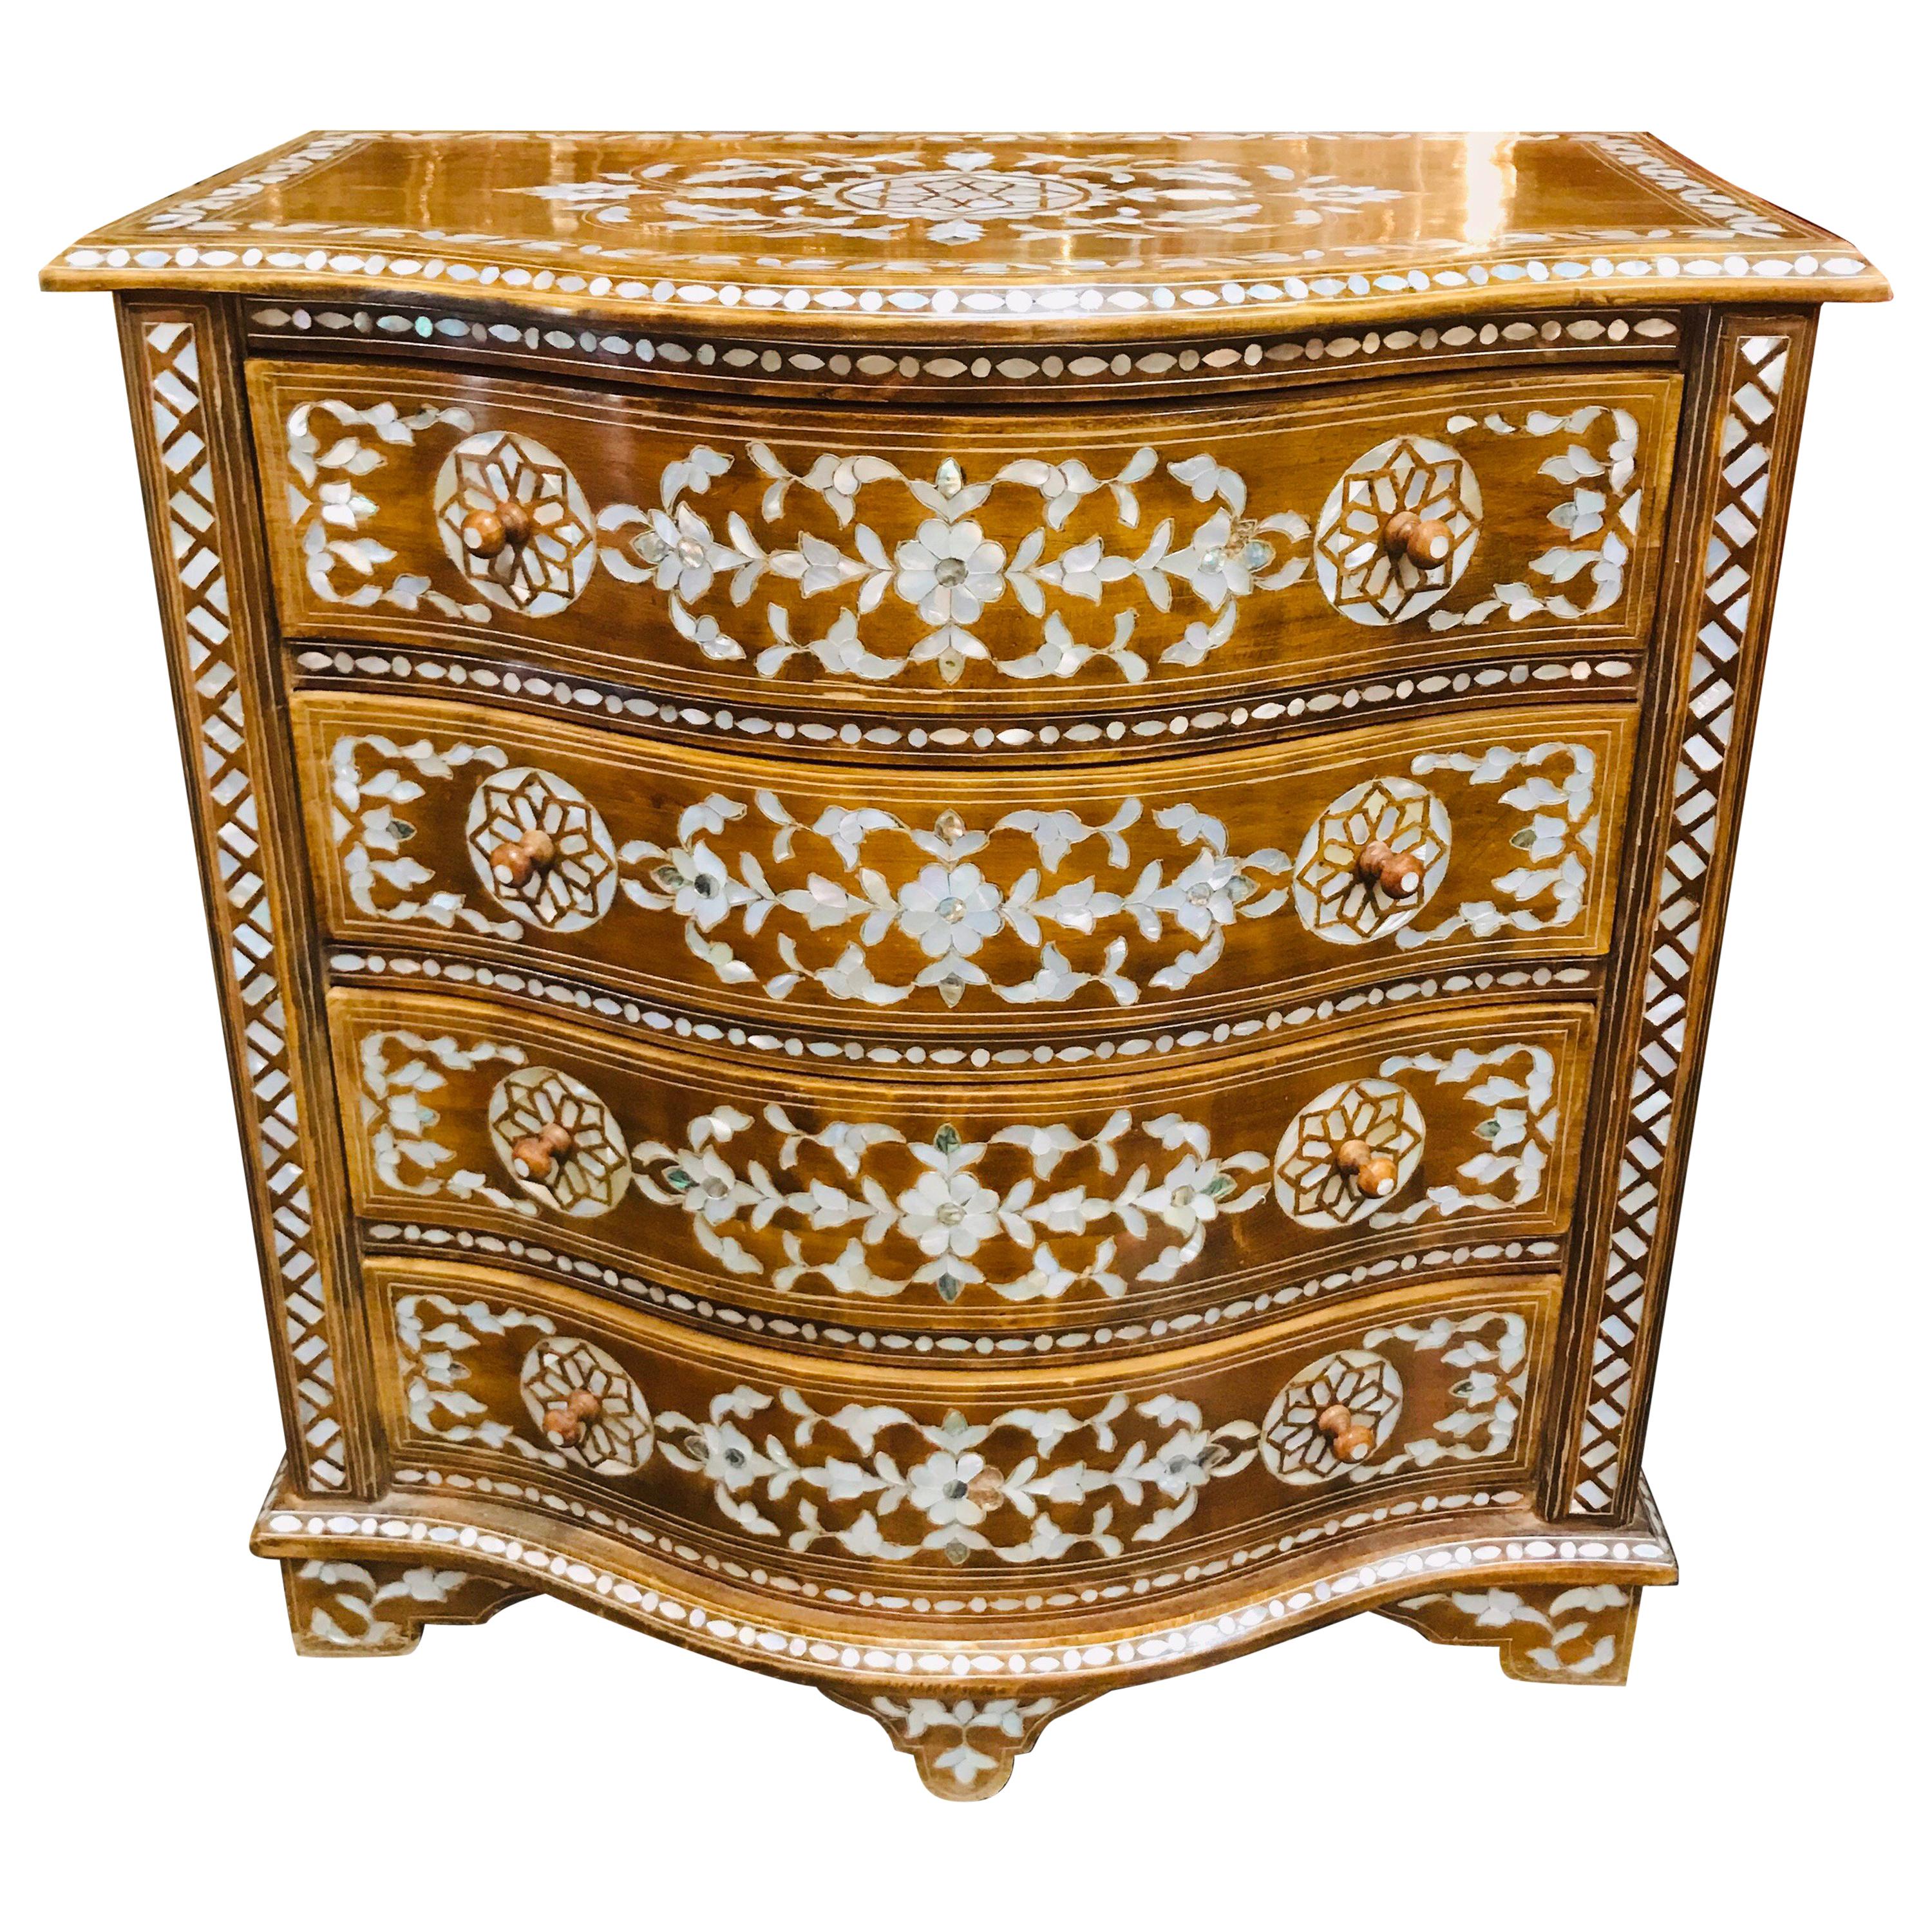 Early 20th Century Syrian Mother of Pearl Inlaid Chest